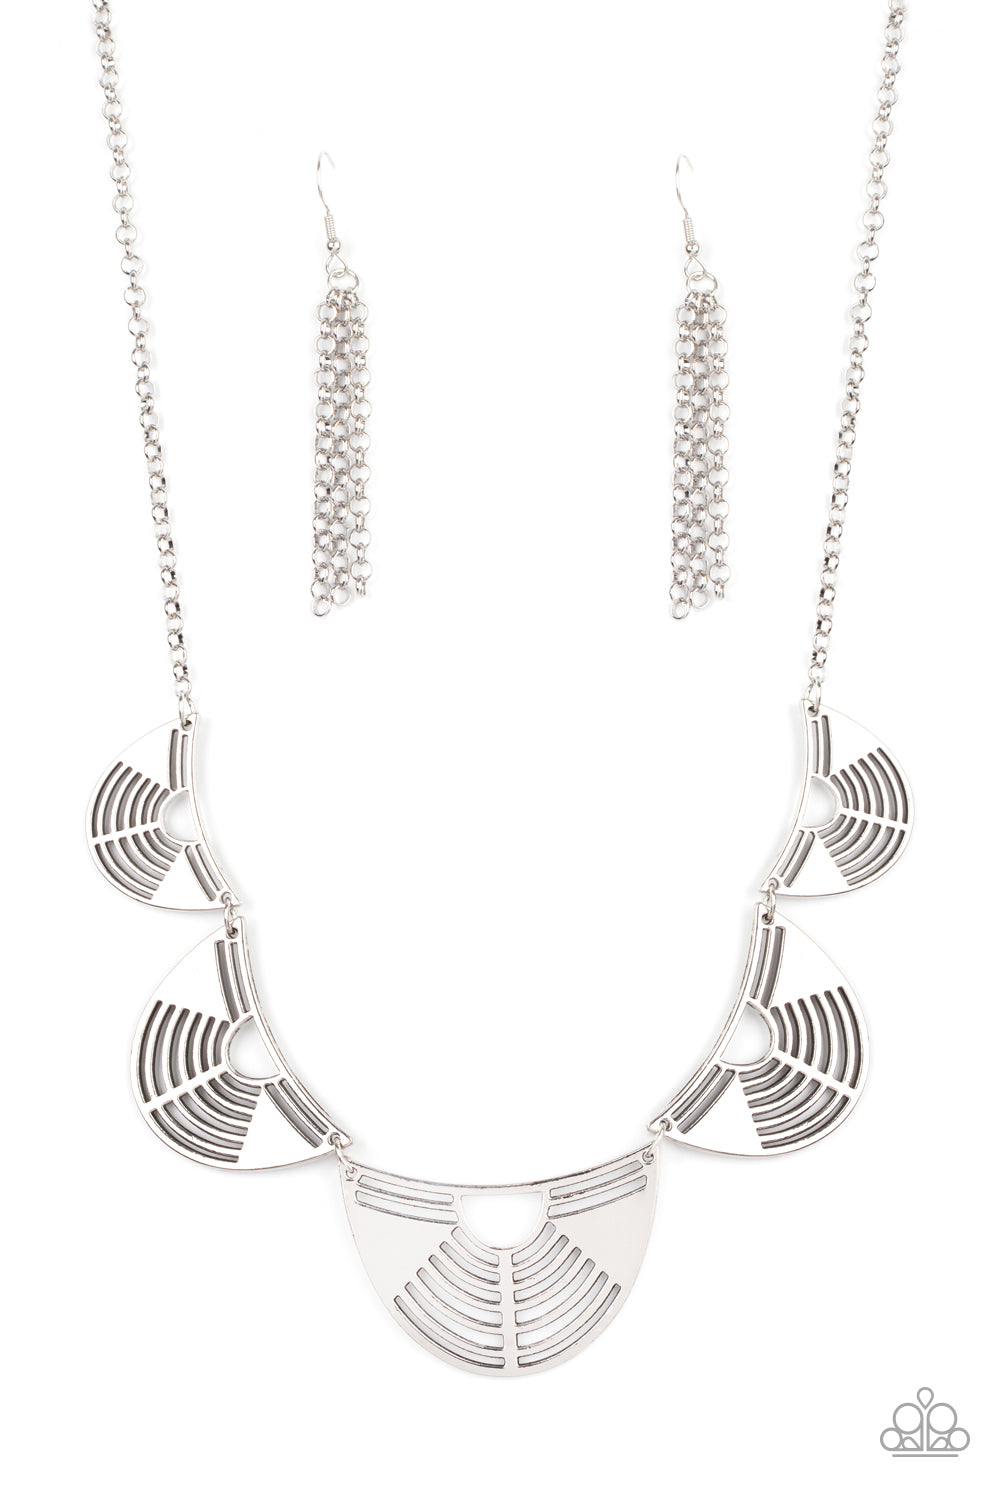 Record-Breaking Radiance - Silver Necklace